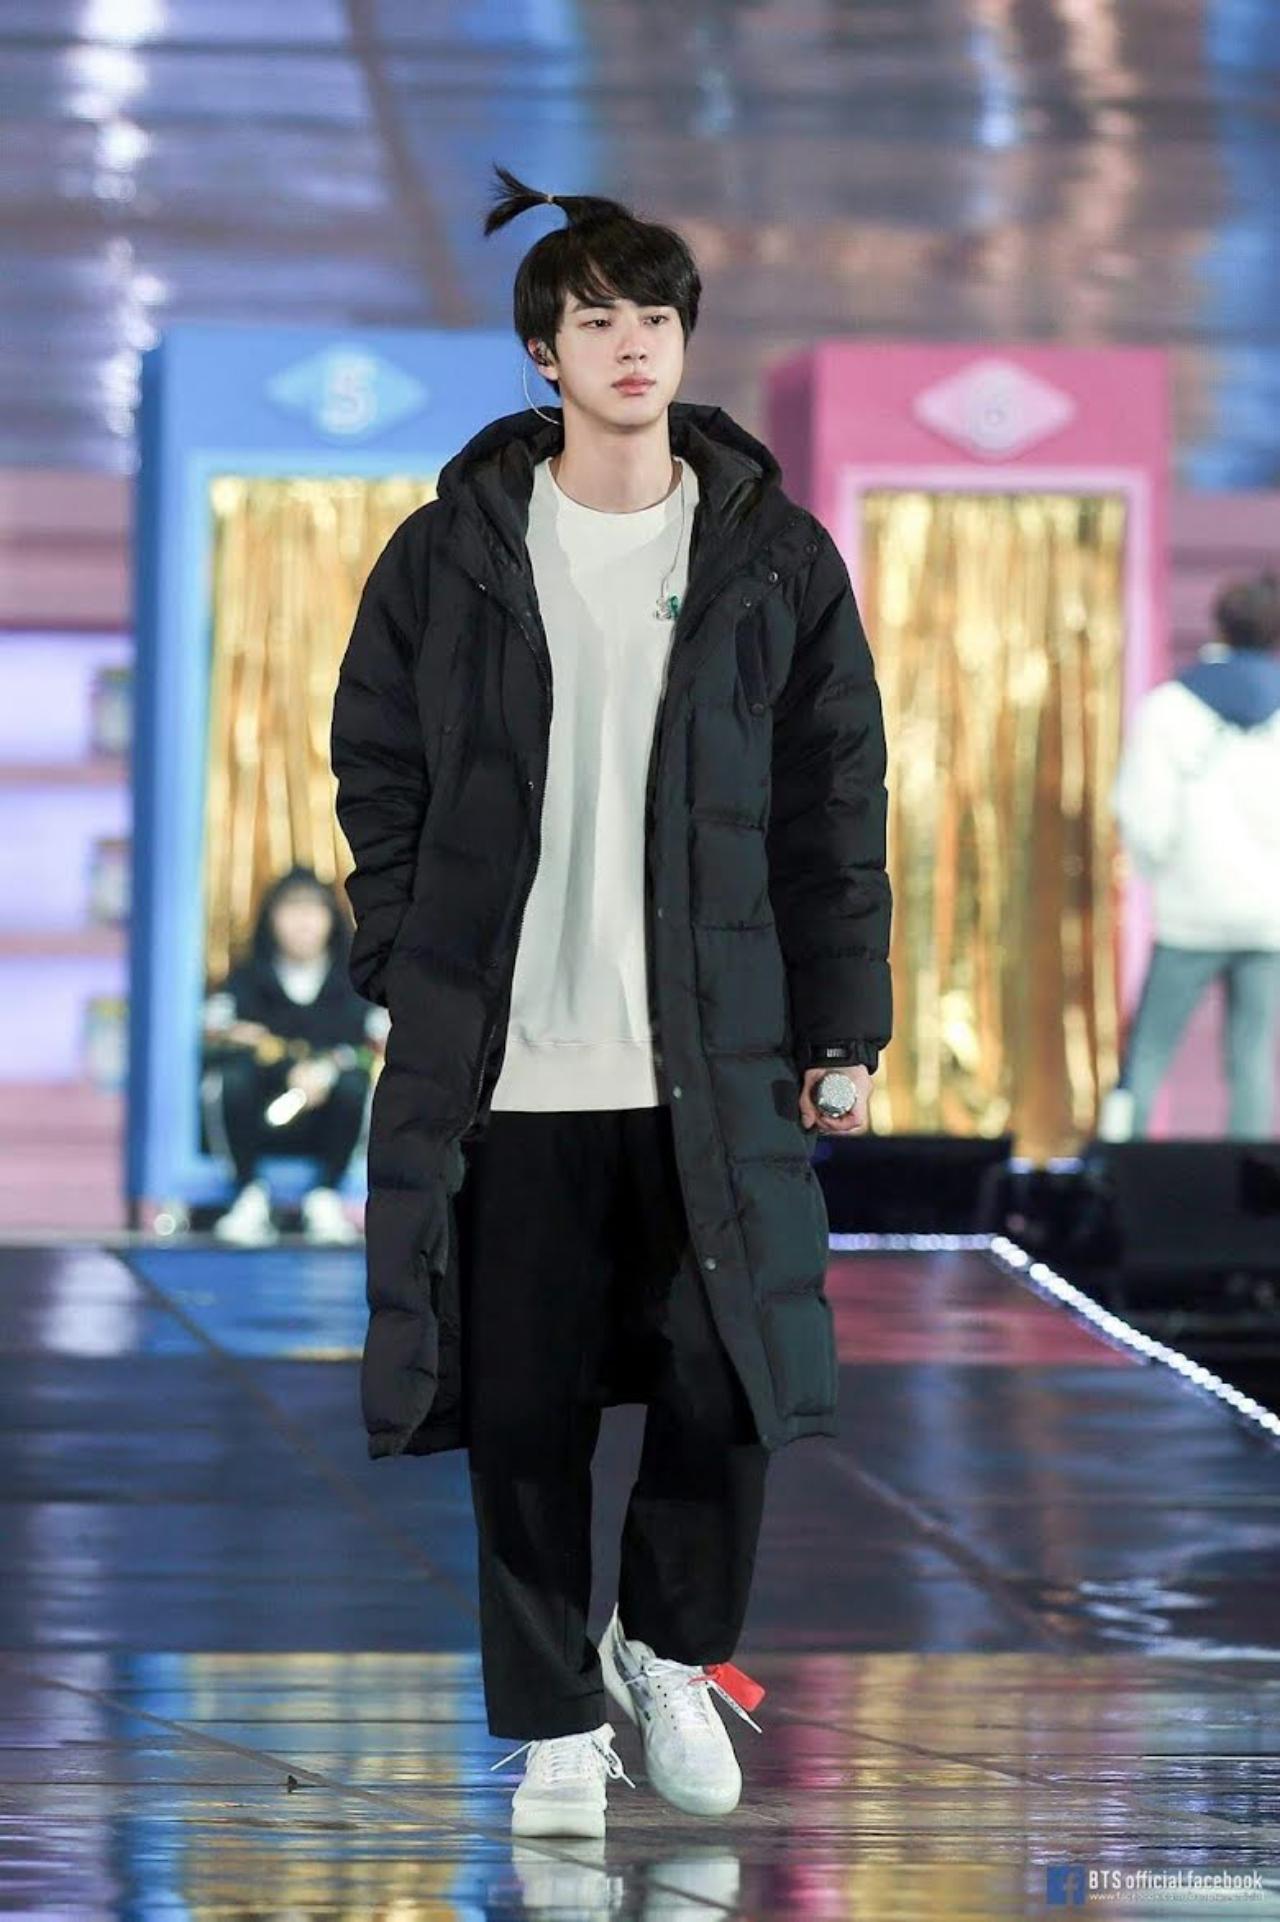 ARMYs admire the sheer confidence with which Jin can pull anything off! Here, he walked down in a cute little ponytail and the tags on his footwear intact once again